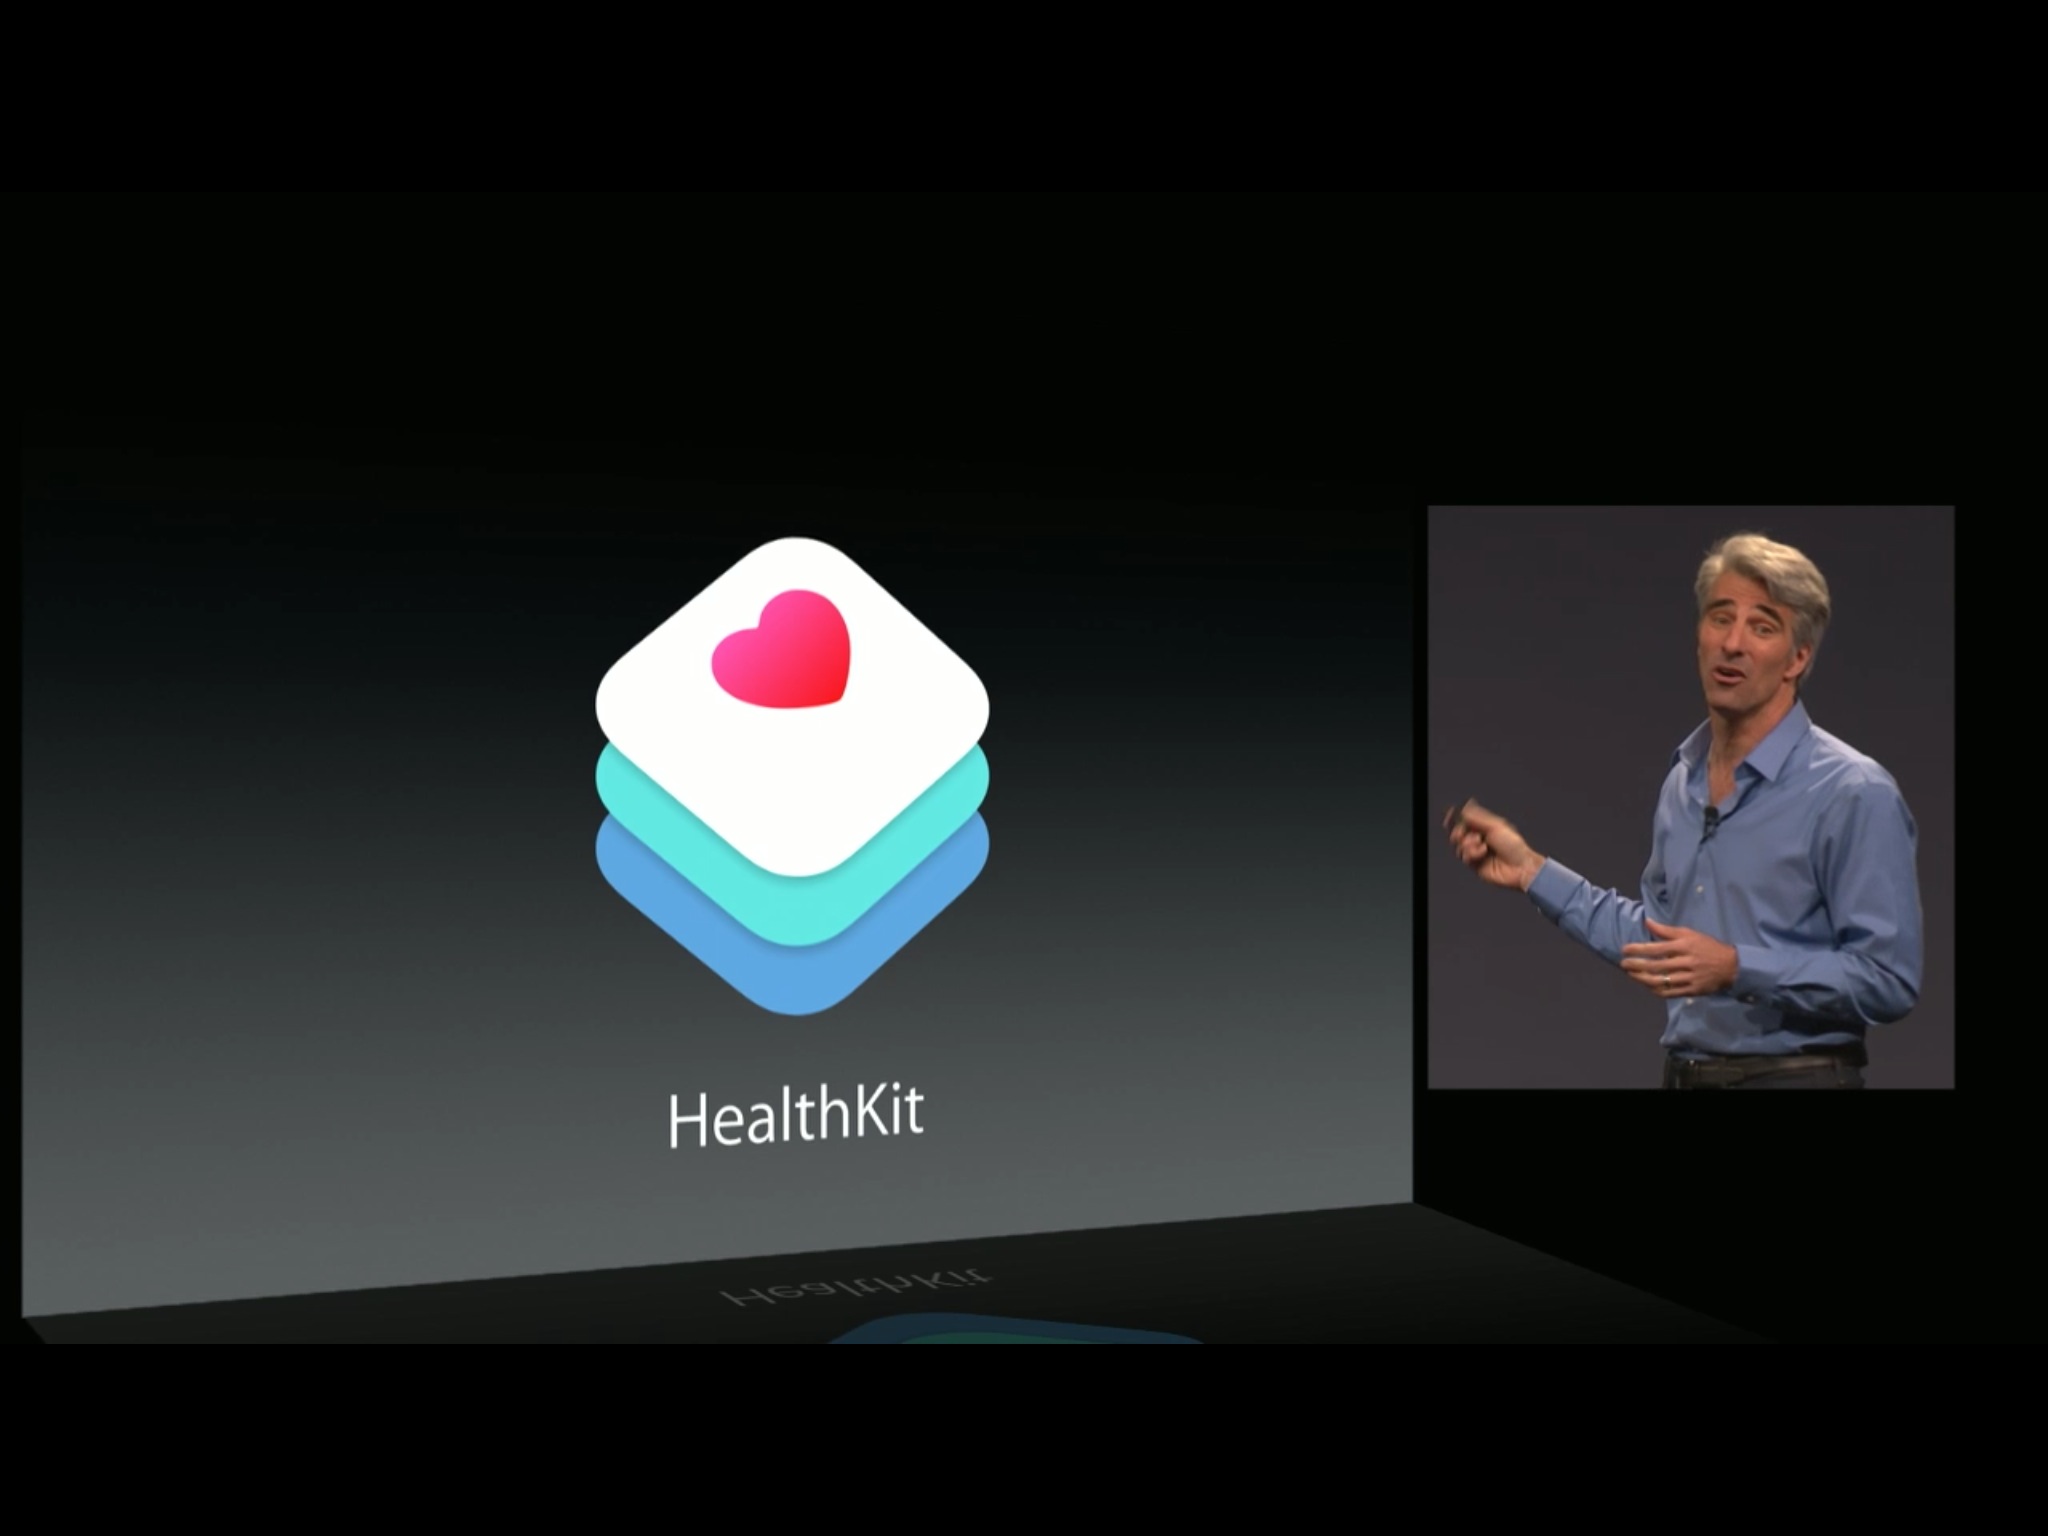 Apple releases developer guidelines for iOS 8 features, disallows HealthKit data on iCloud